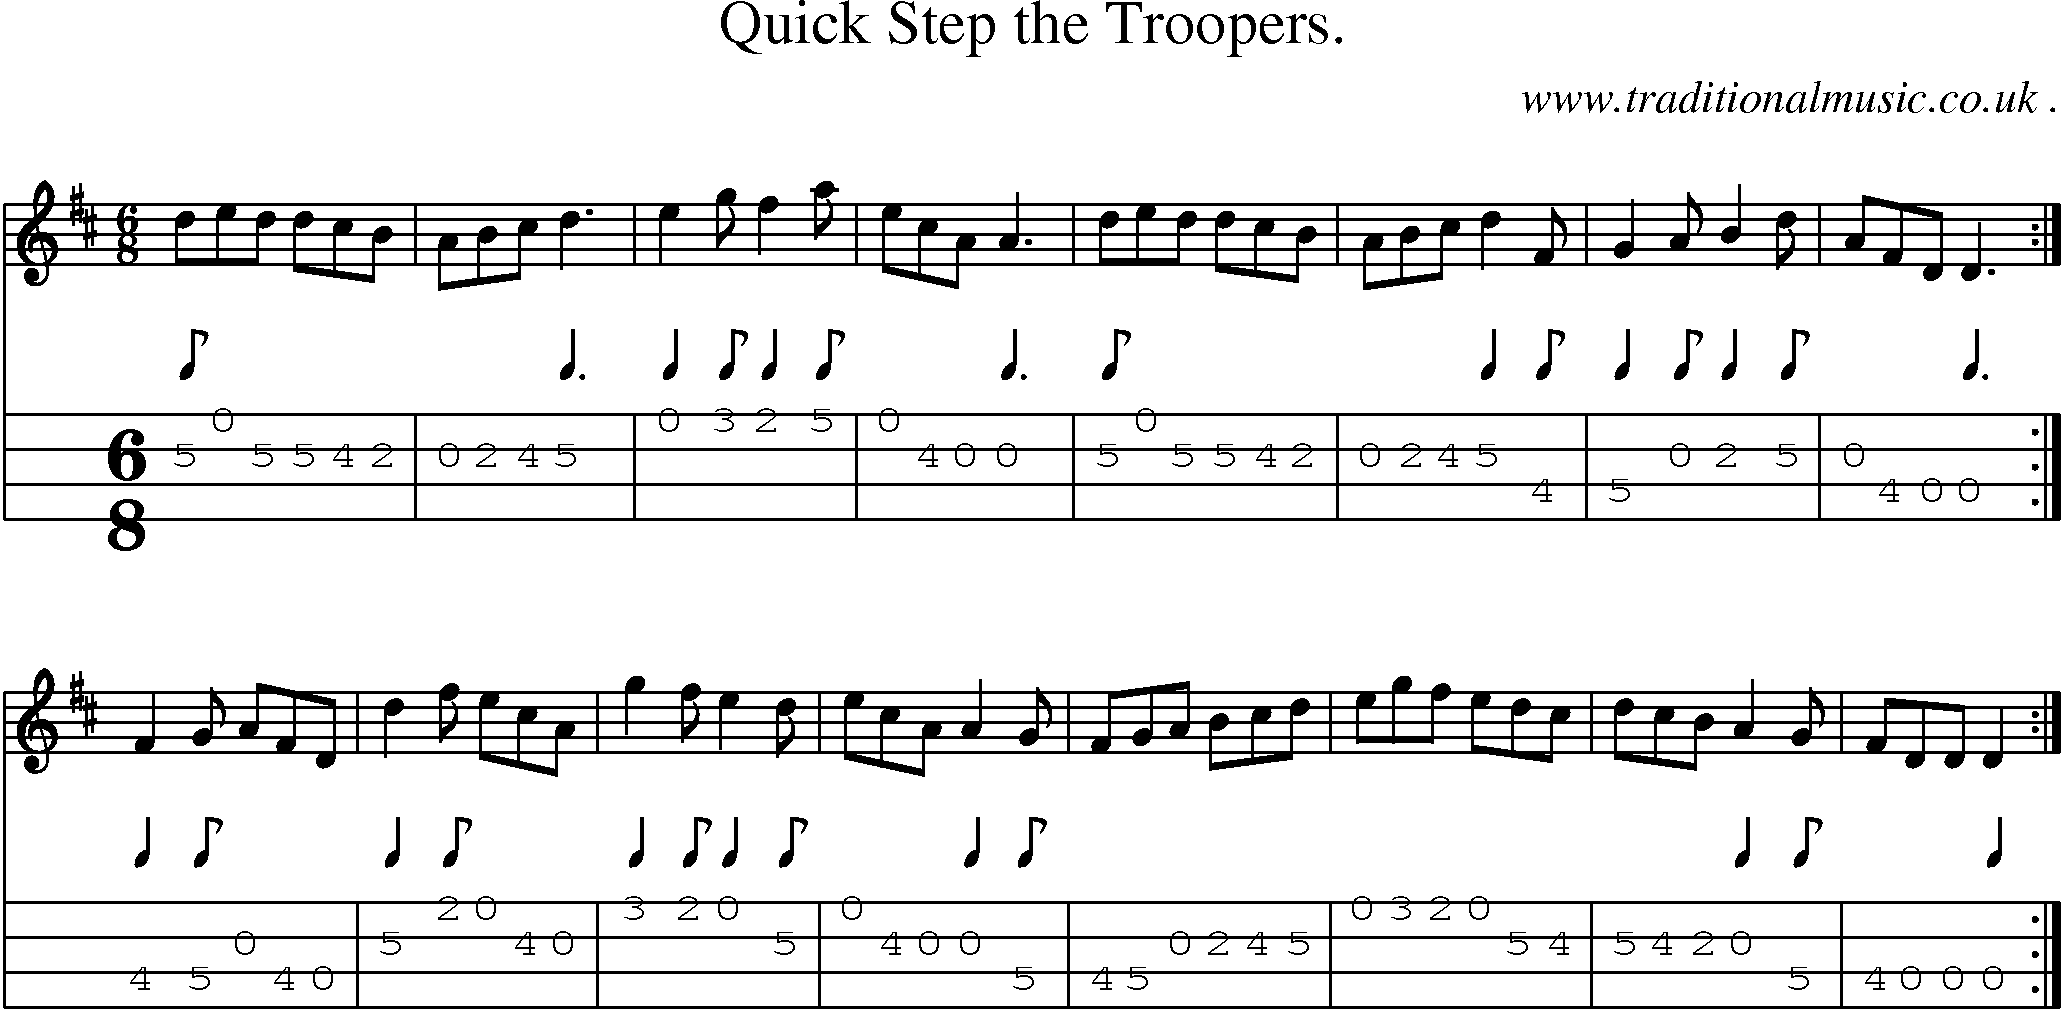 Sheet-music  score, Chords and Mandolin Tabs for Quick Step The Troopers